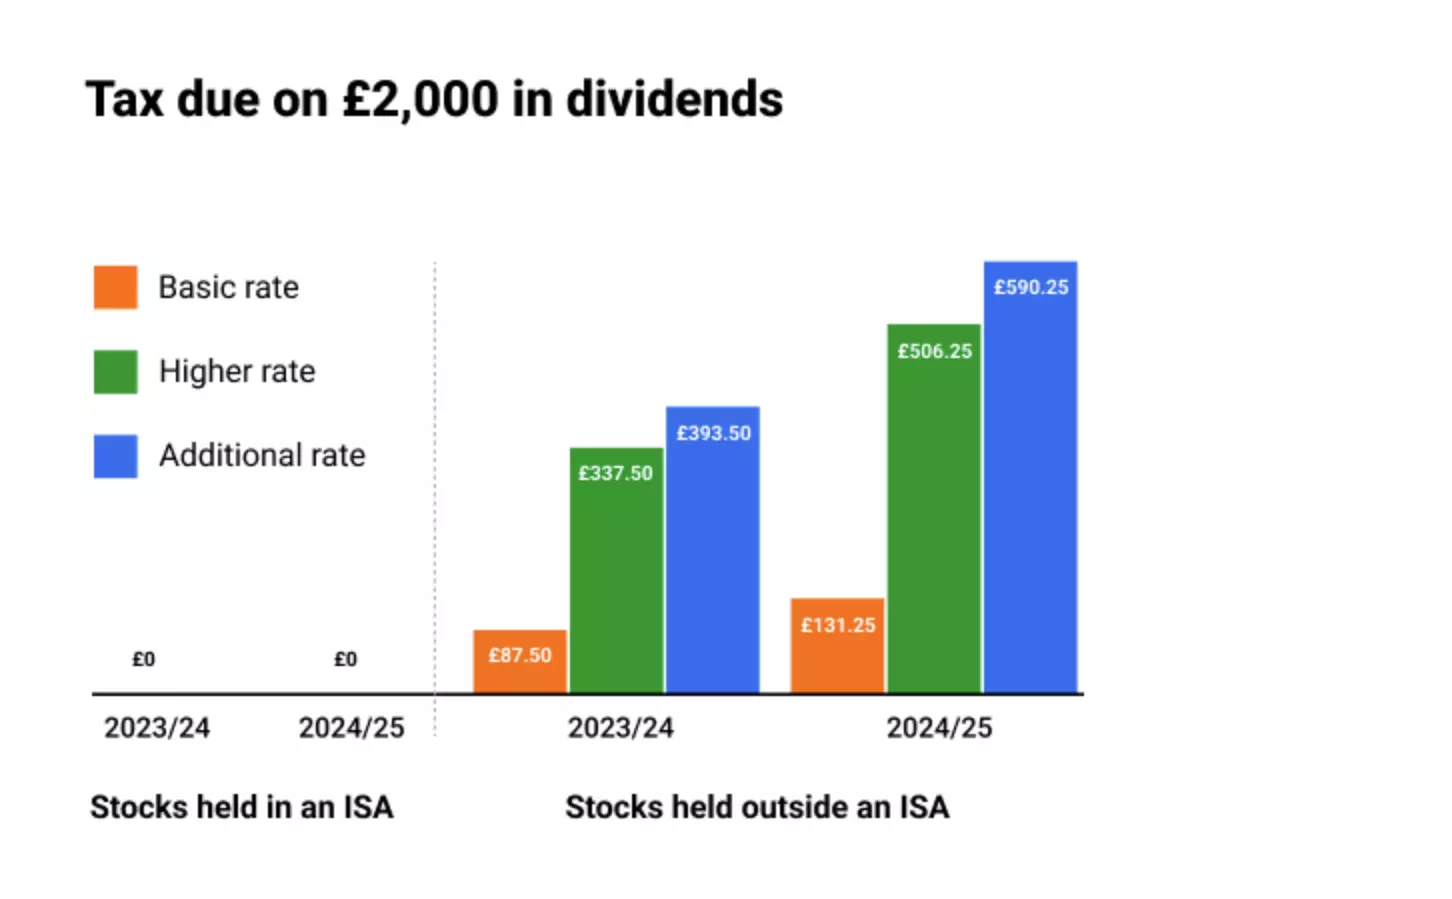 Tax due-dividends